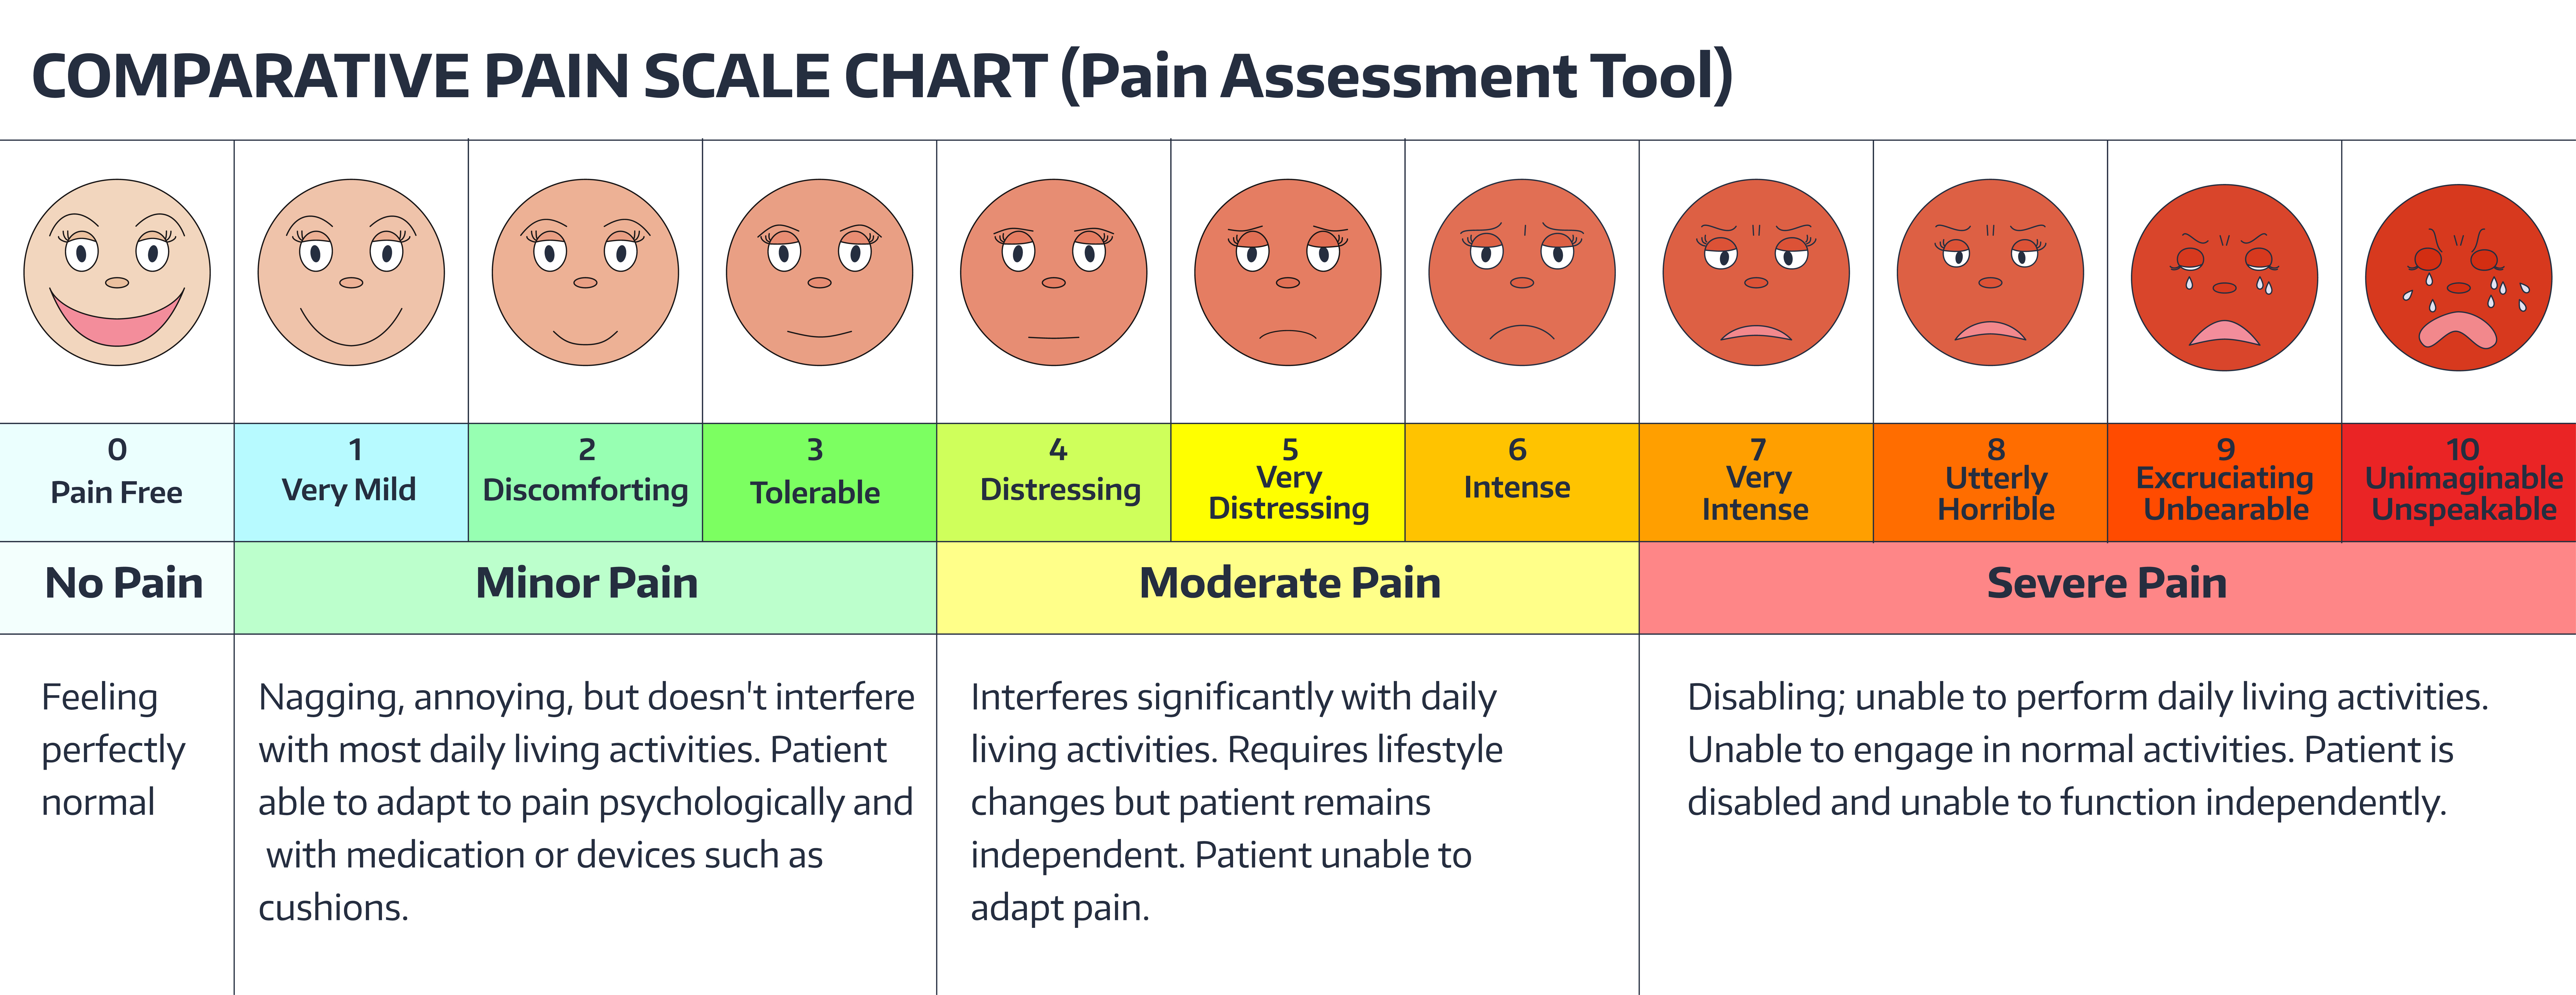 Faces pain rating scale. Comparative pain scale chart. Pain assessment